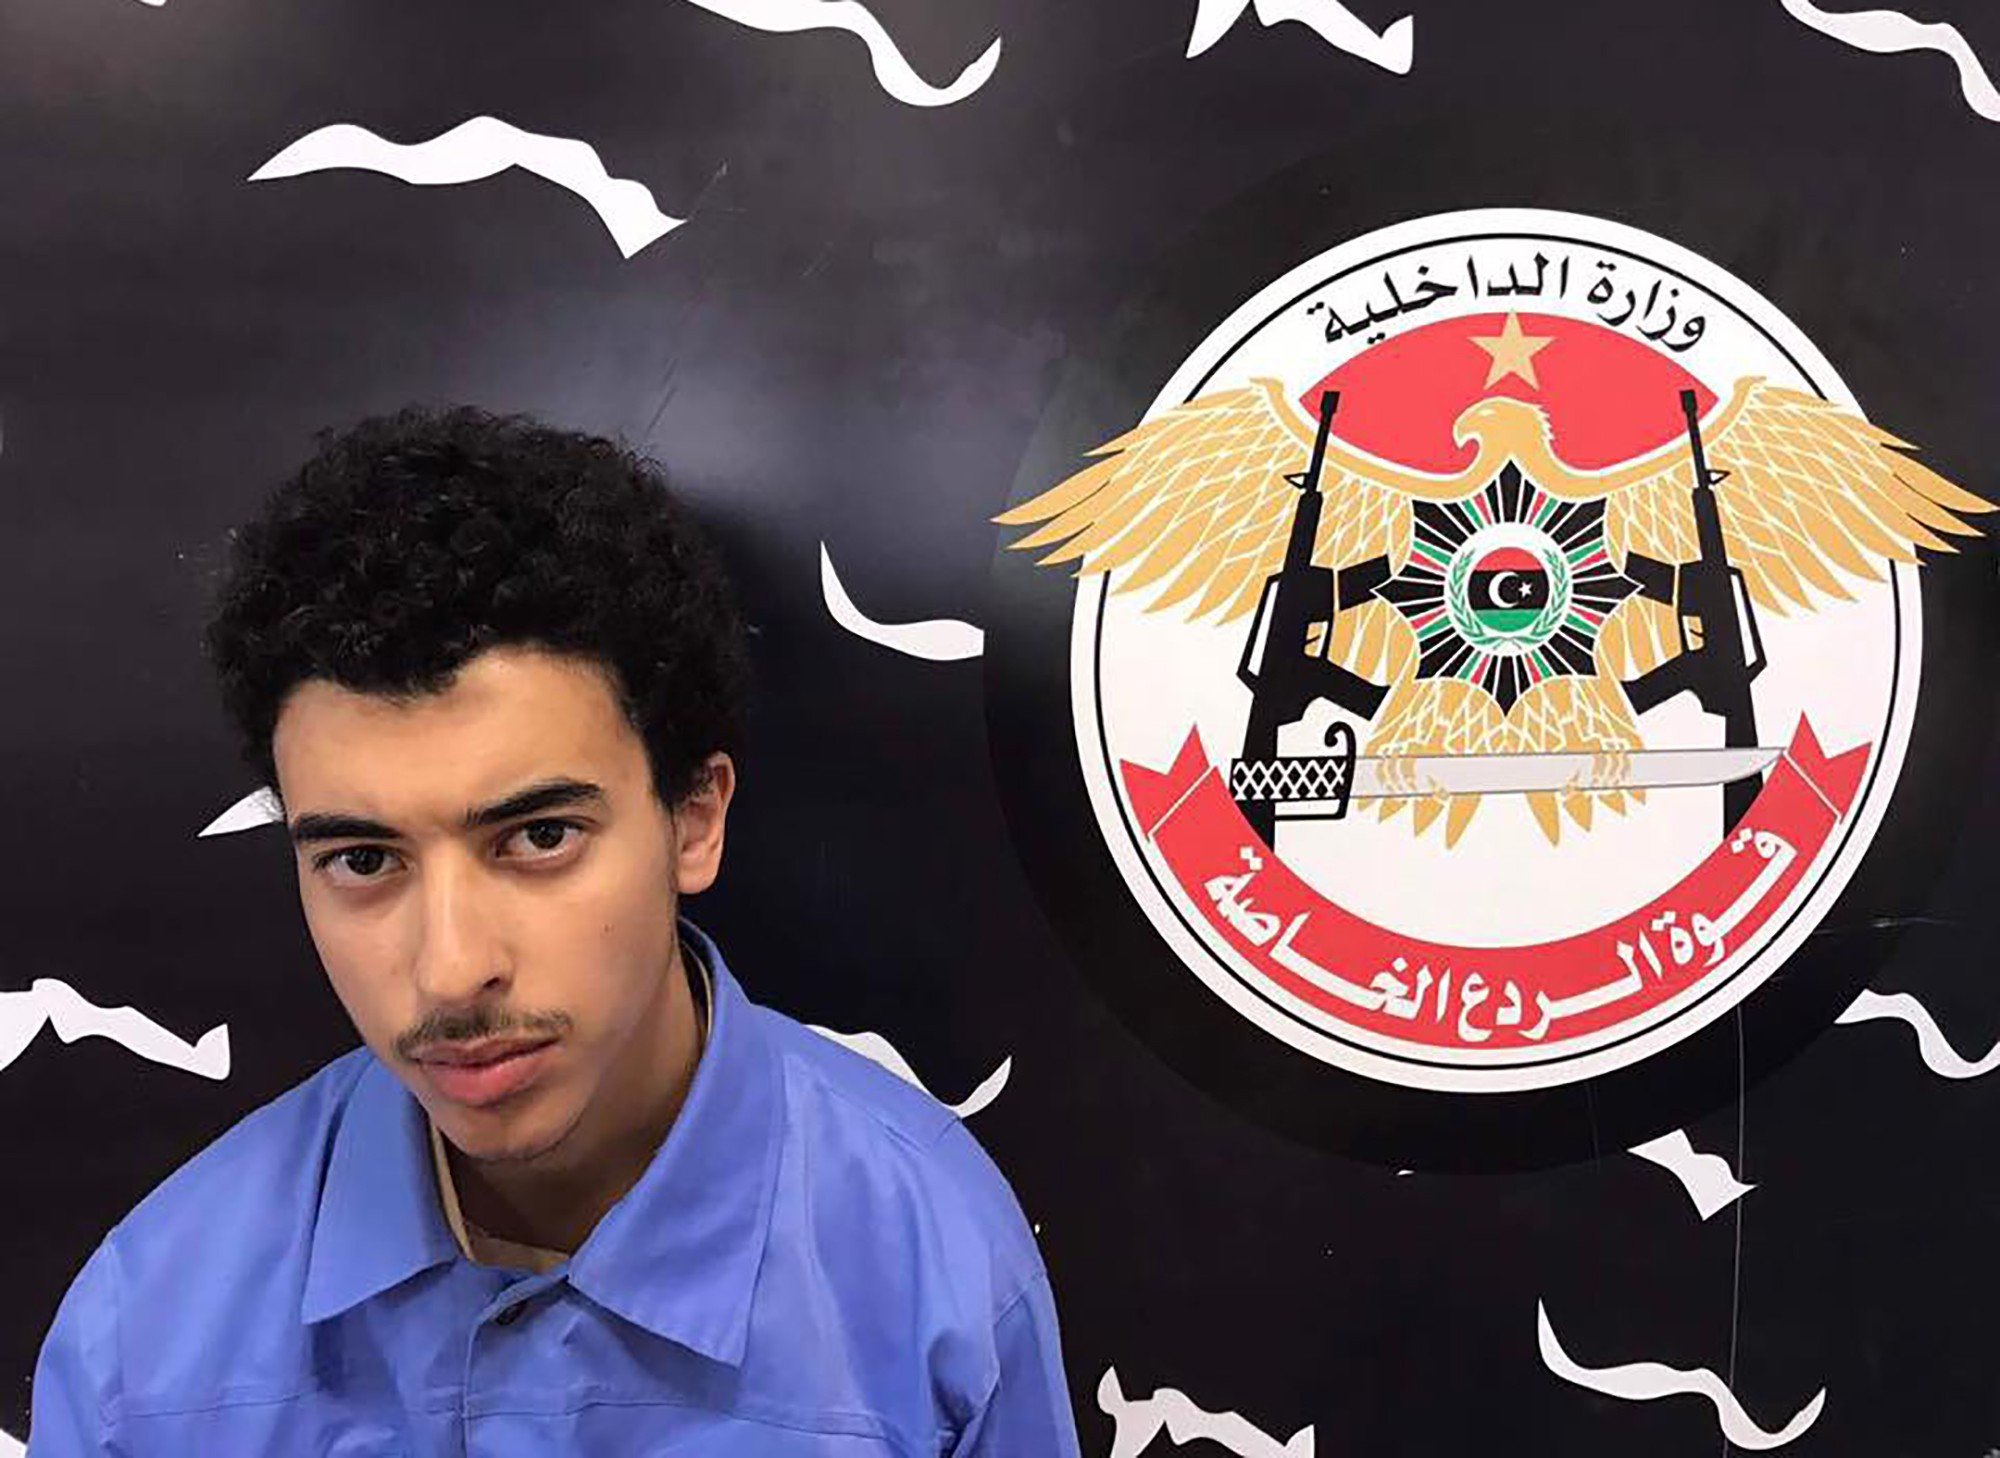 Hashem Abedi, brother of the Manchester bomber, was found guilty by a jury of the murder of 22 people at an Ariana Grande concert in 2017. Photo: Libya’s Special Deterrence Force via AFP